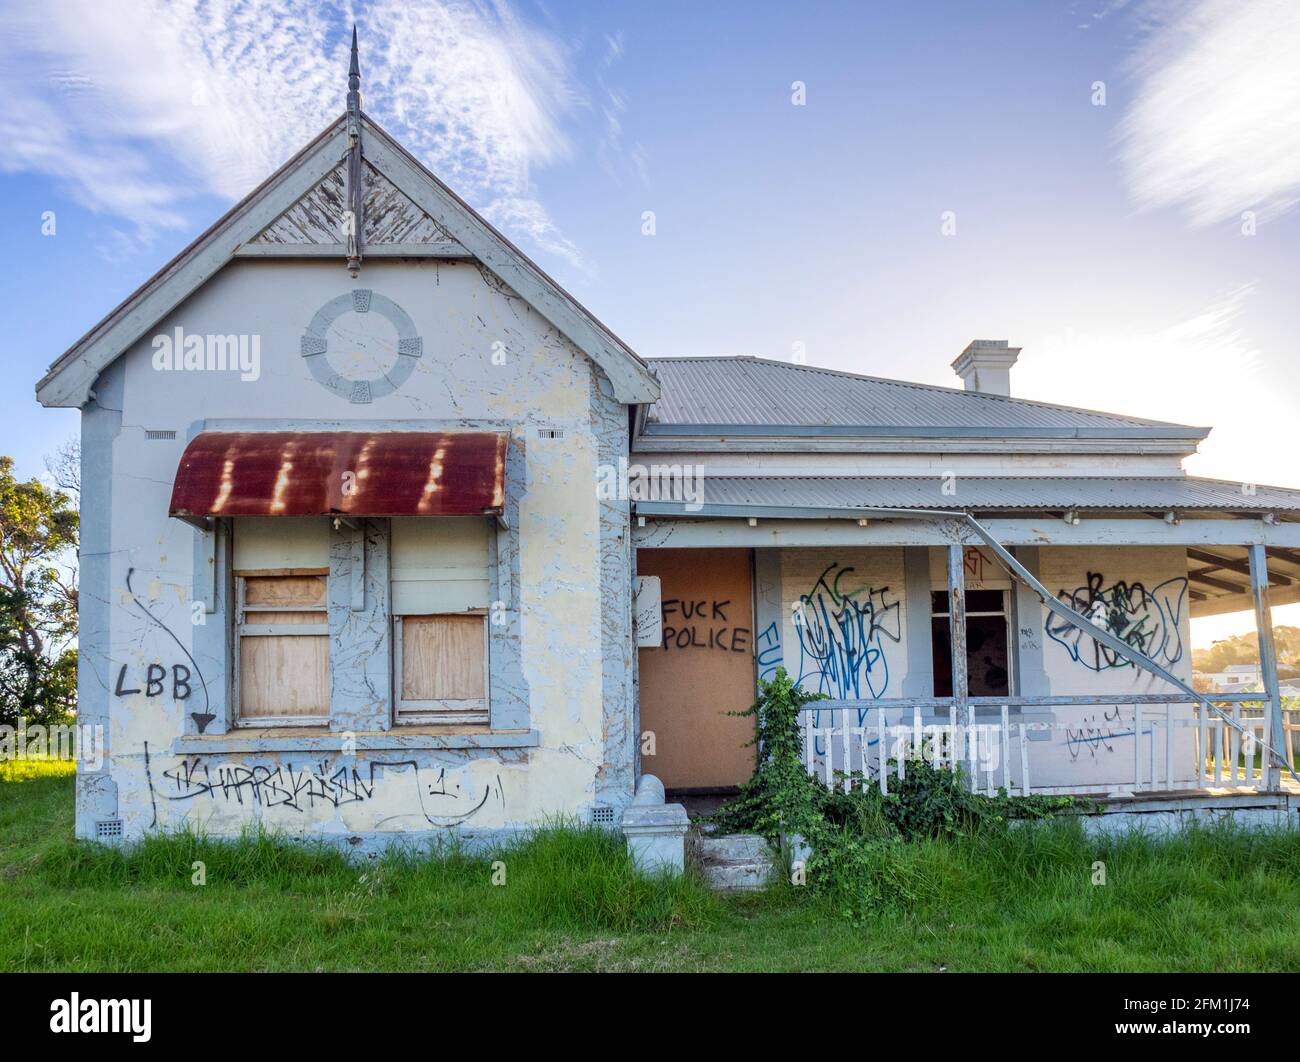 Graffiti on the external walls of an abandoned house. Stock Photo